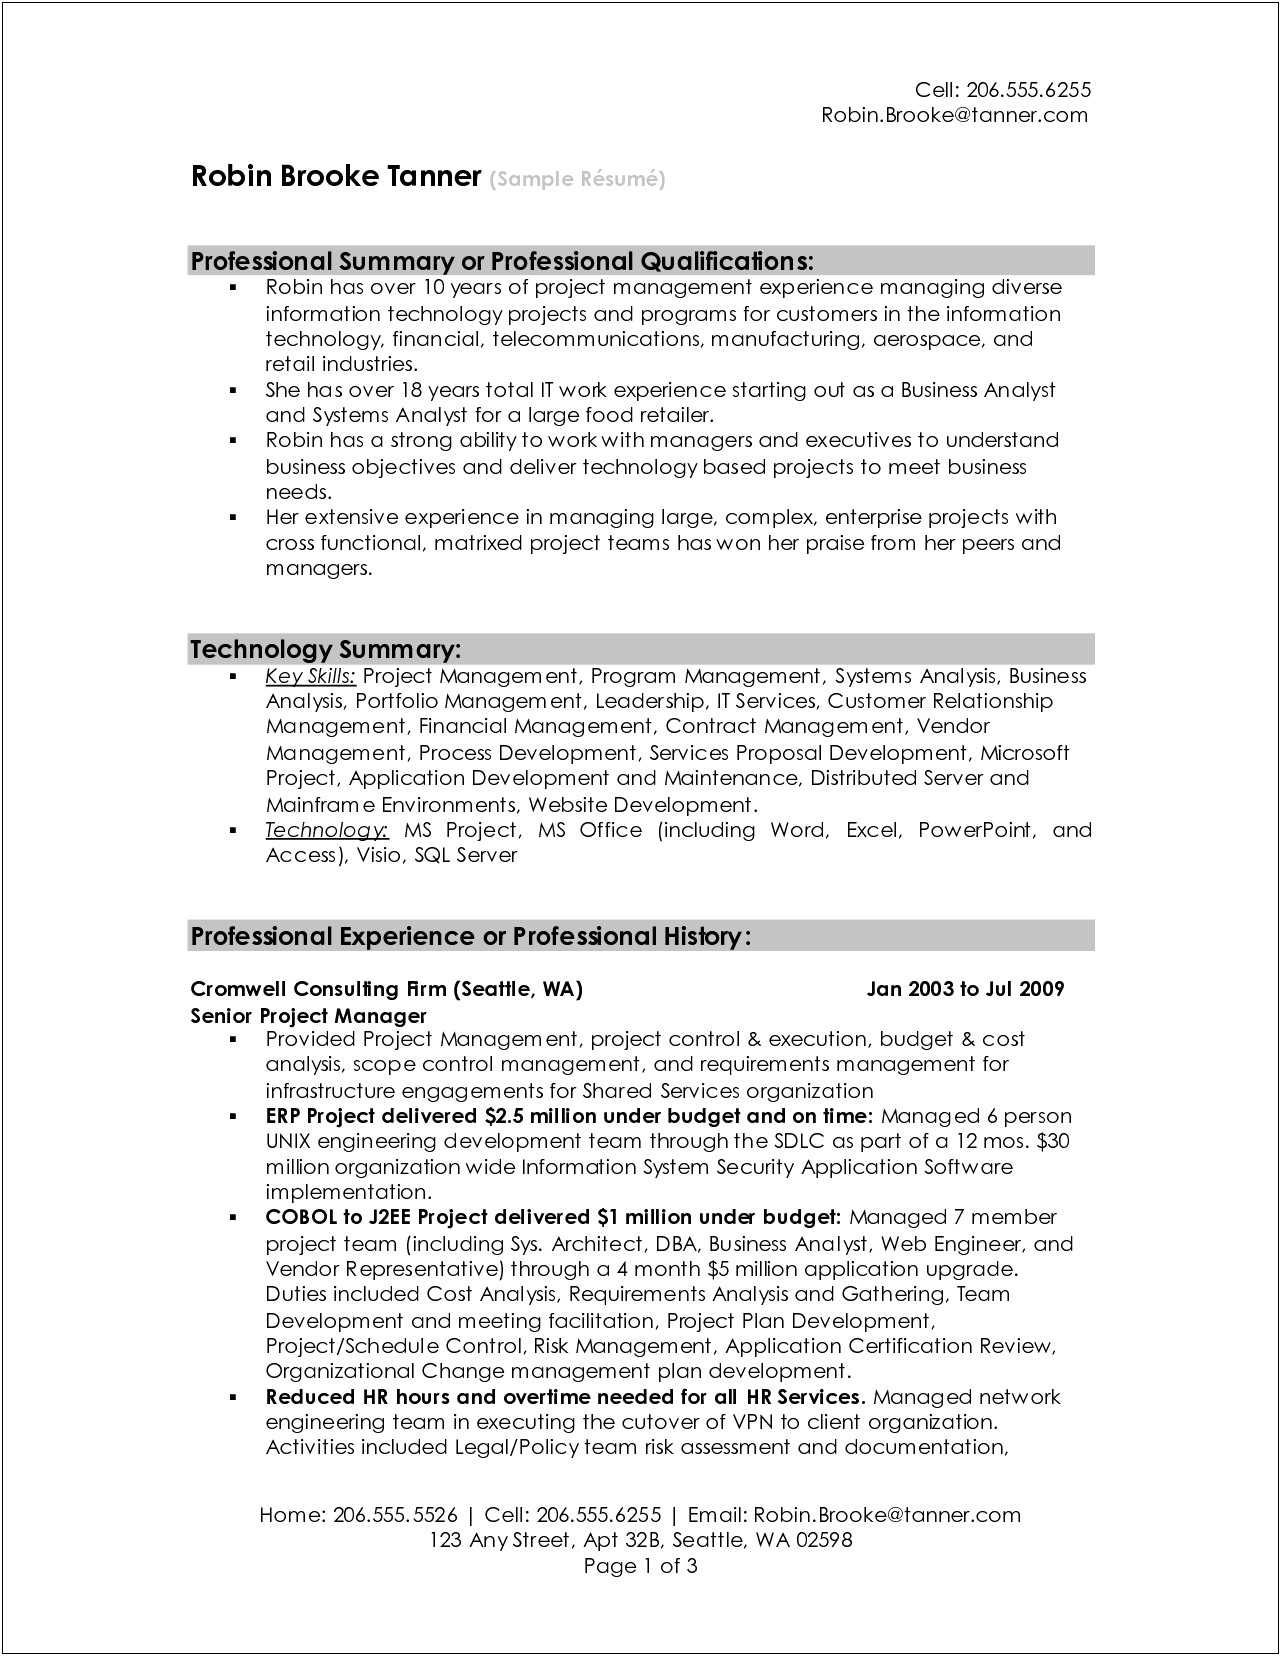 Sample Resumes With Professional Overview